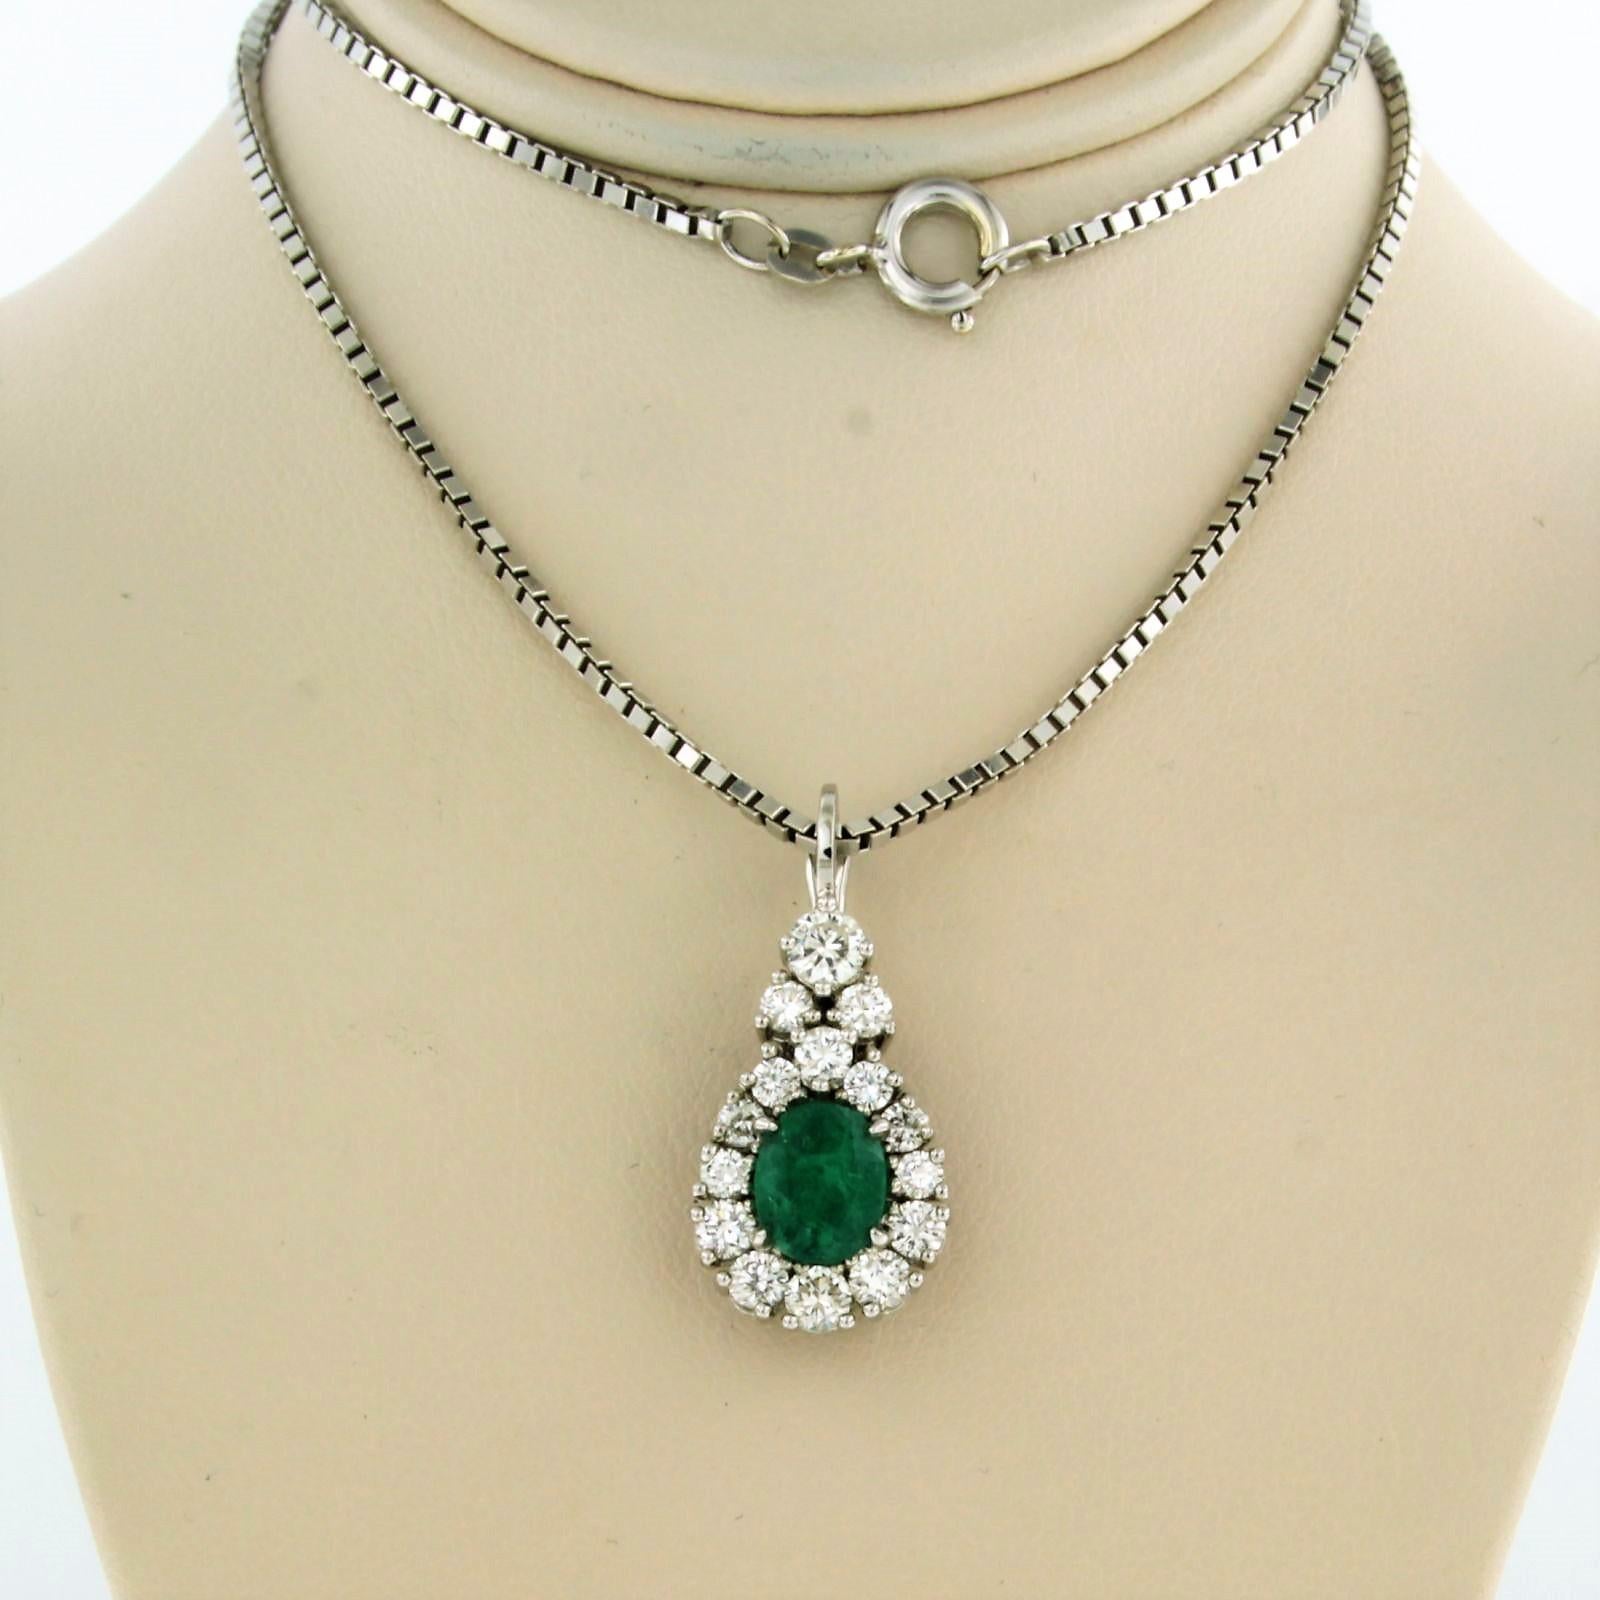 14 kt white gold necklace with pendant set with emerald and brilliant cut diamond to. 1.00 ct - F/G - VS/SI - 40 cm long

Detailed description

the length of the necklace is 40 cm long by 1.4 mm wide

the size of the pendant is 2.5 cm by 1.3 cm